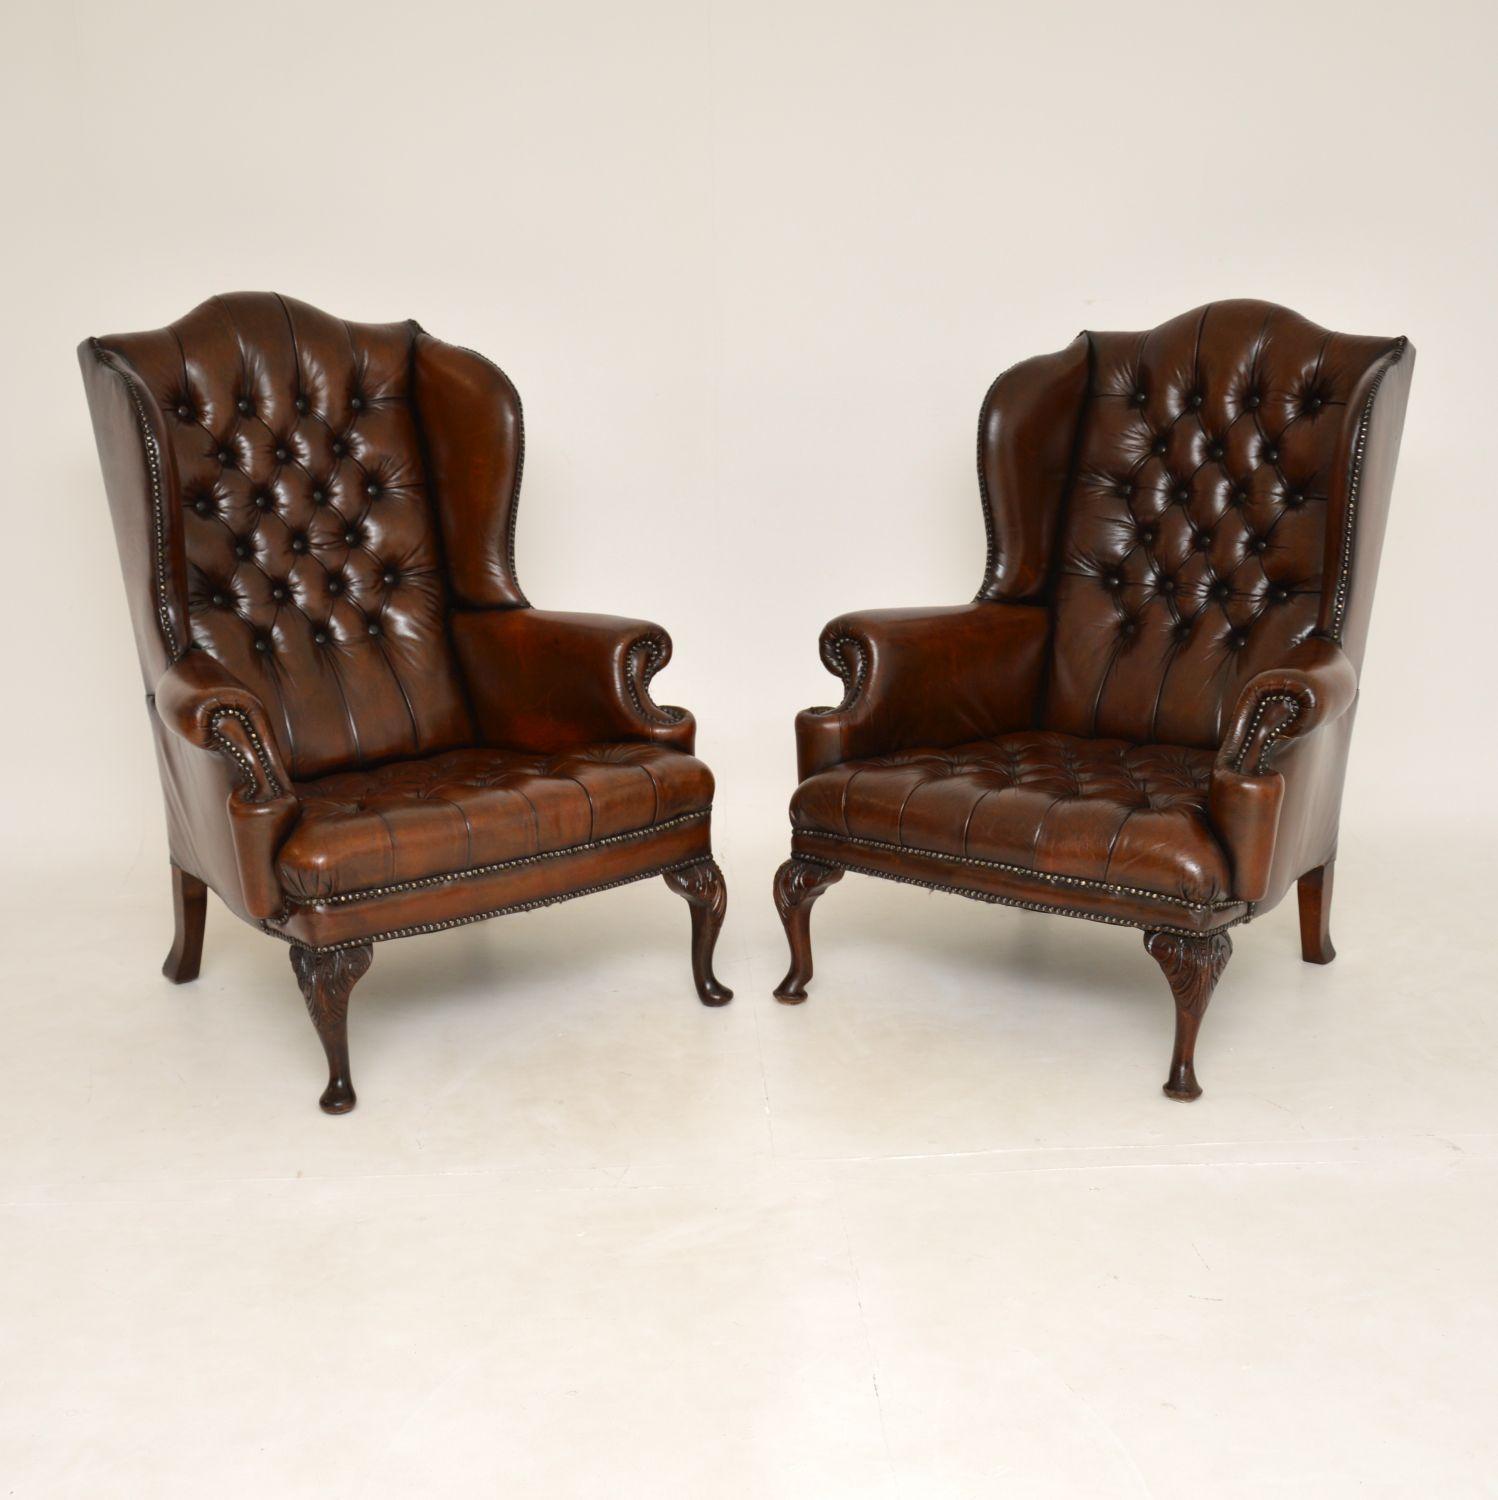 An excellent pair of vintage deep buttoned leather wing back armchairs. These were made in England, they date from around the 1930-1950’s period.
They are of superb quality and are extremely comfortable, with very generous proportions. They have